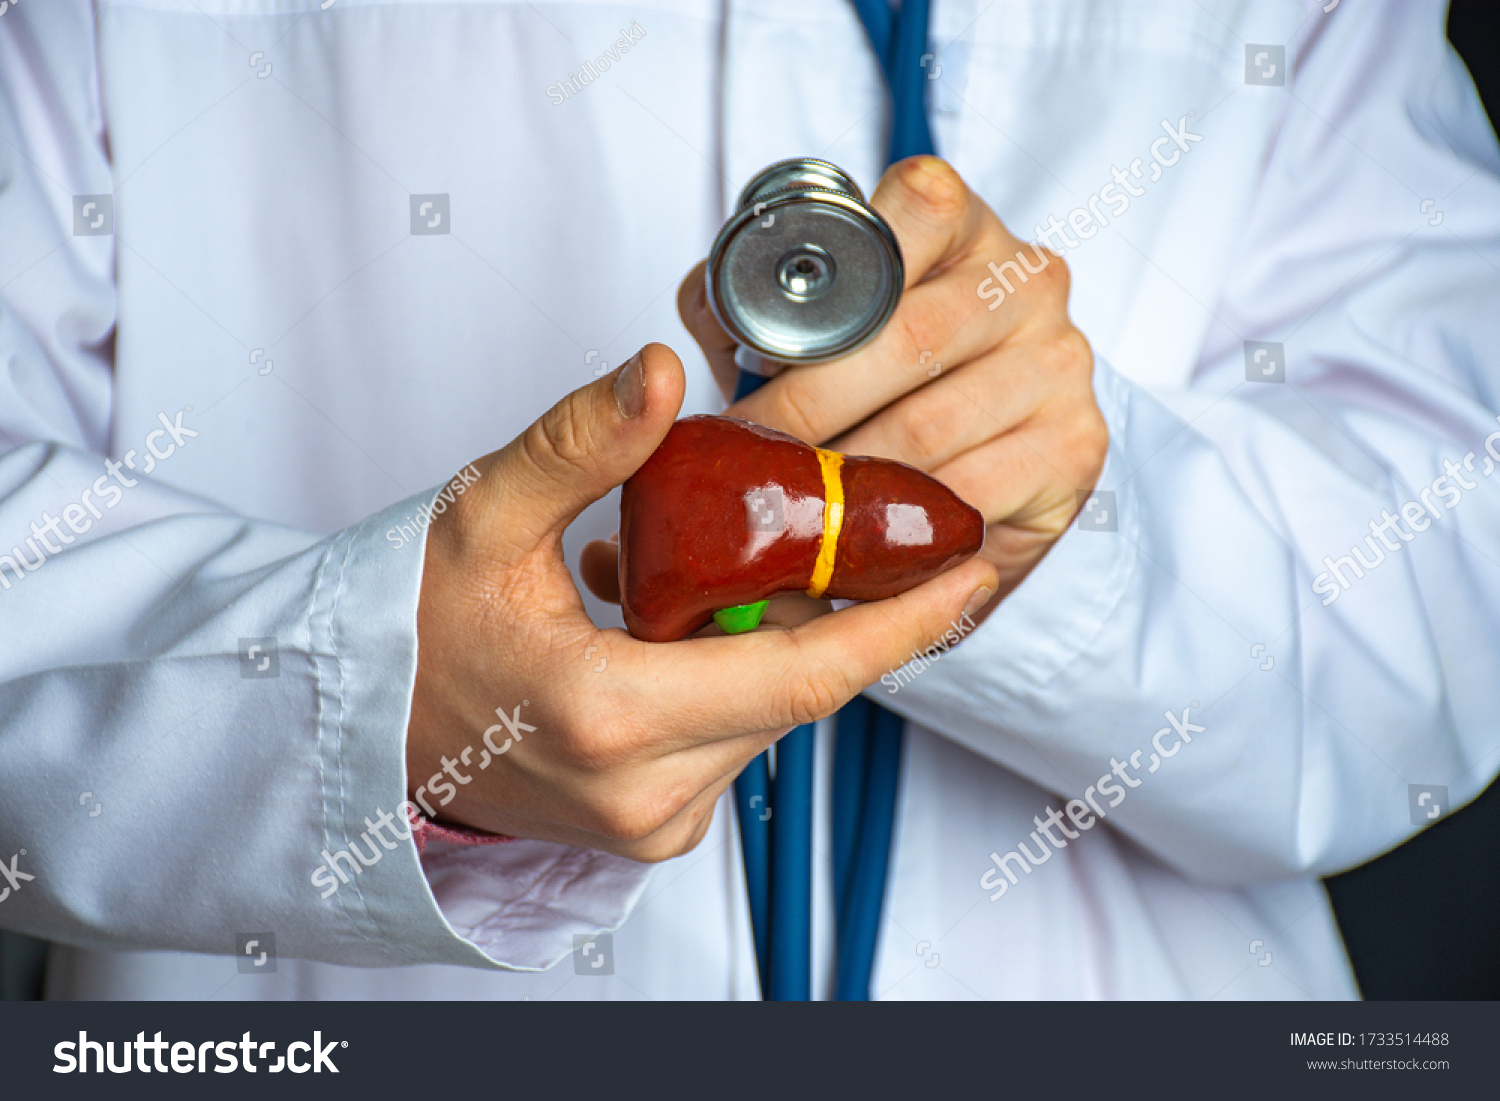 
Medical professional, doctor, gastroenterologist or hepatologist holds anatomical model of human liver in his hand and directs by stethoscope in his other hand to diagnose health and diseases #1733514488